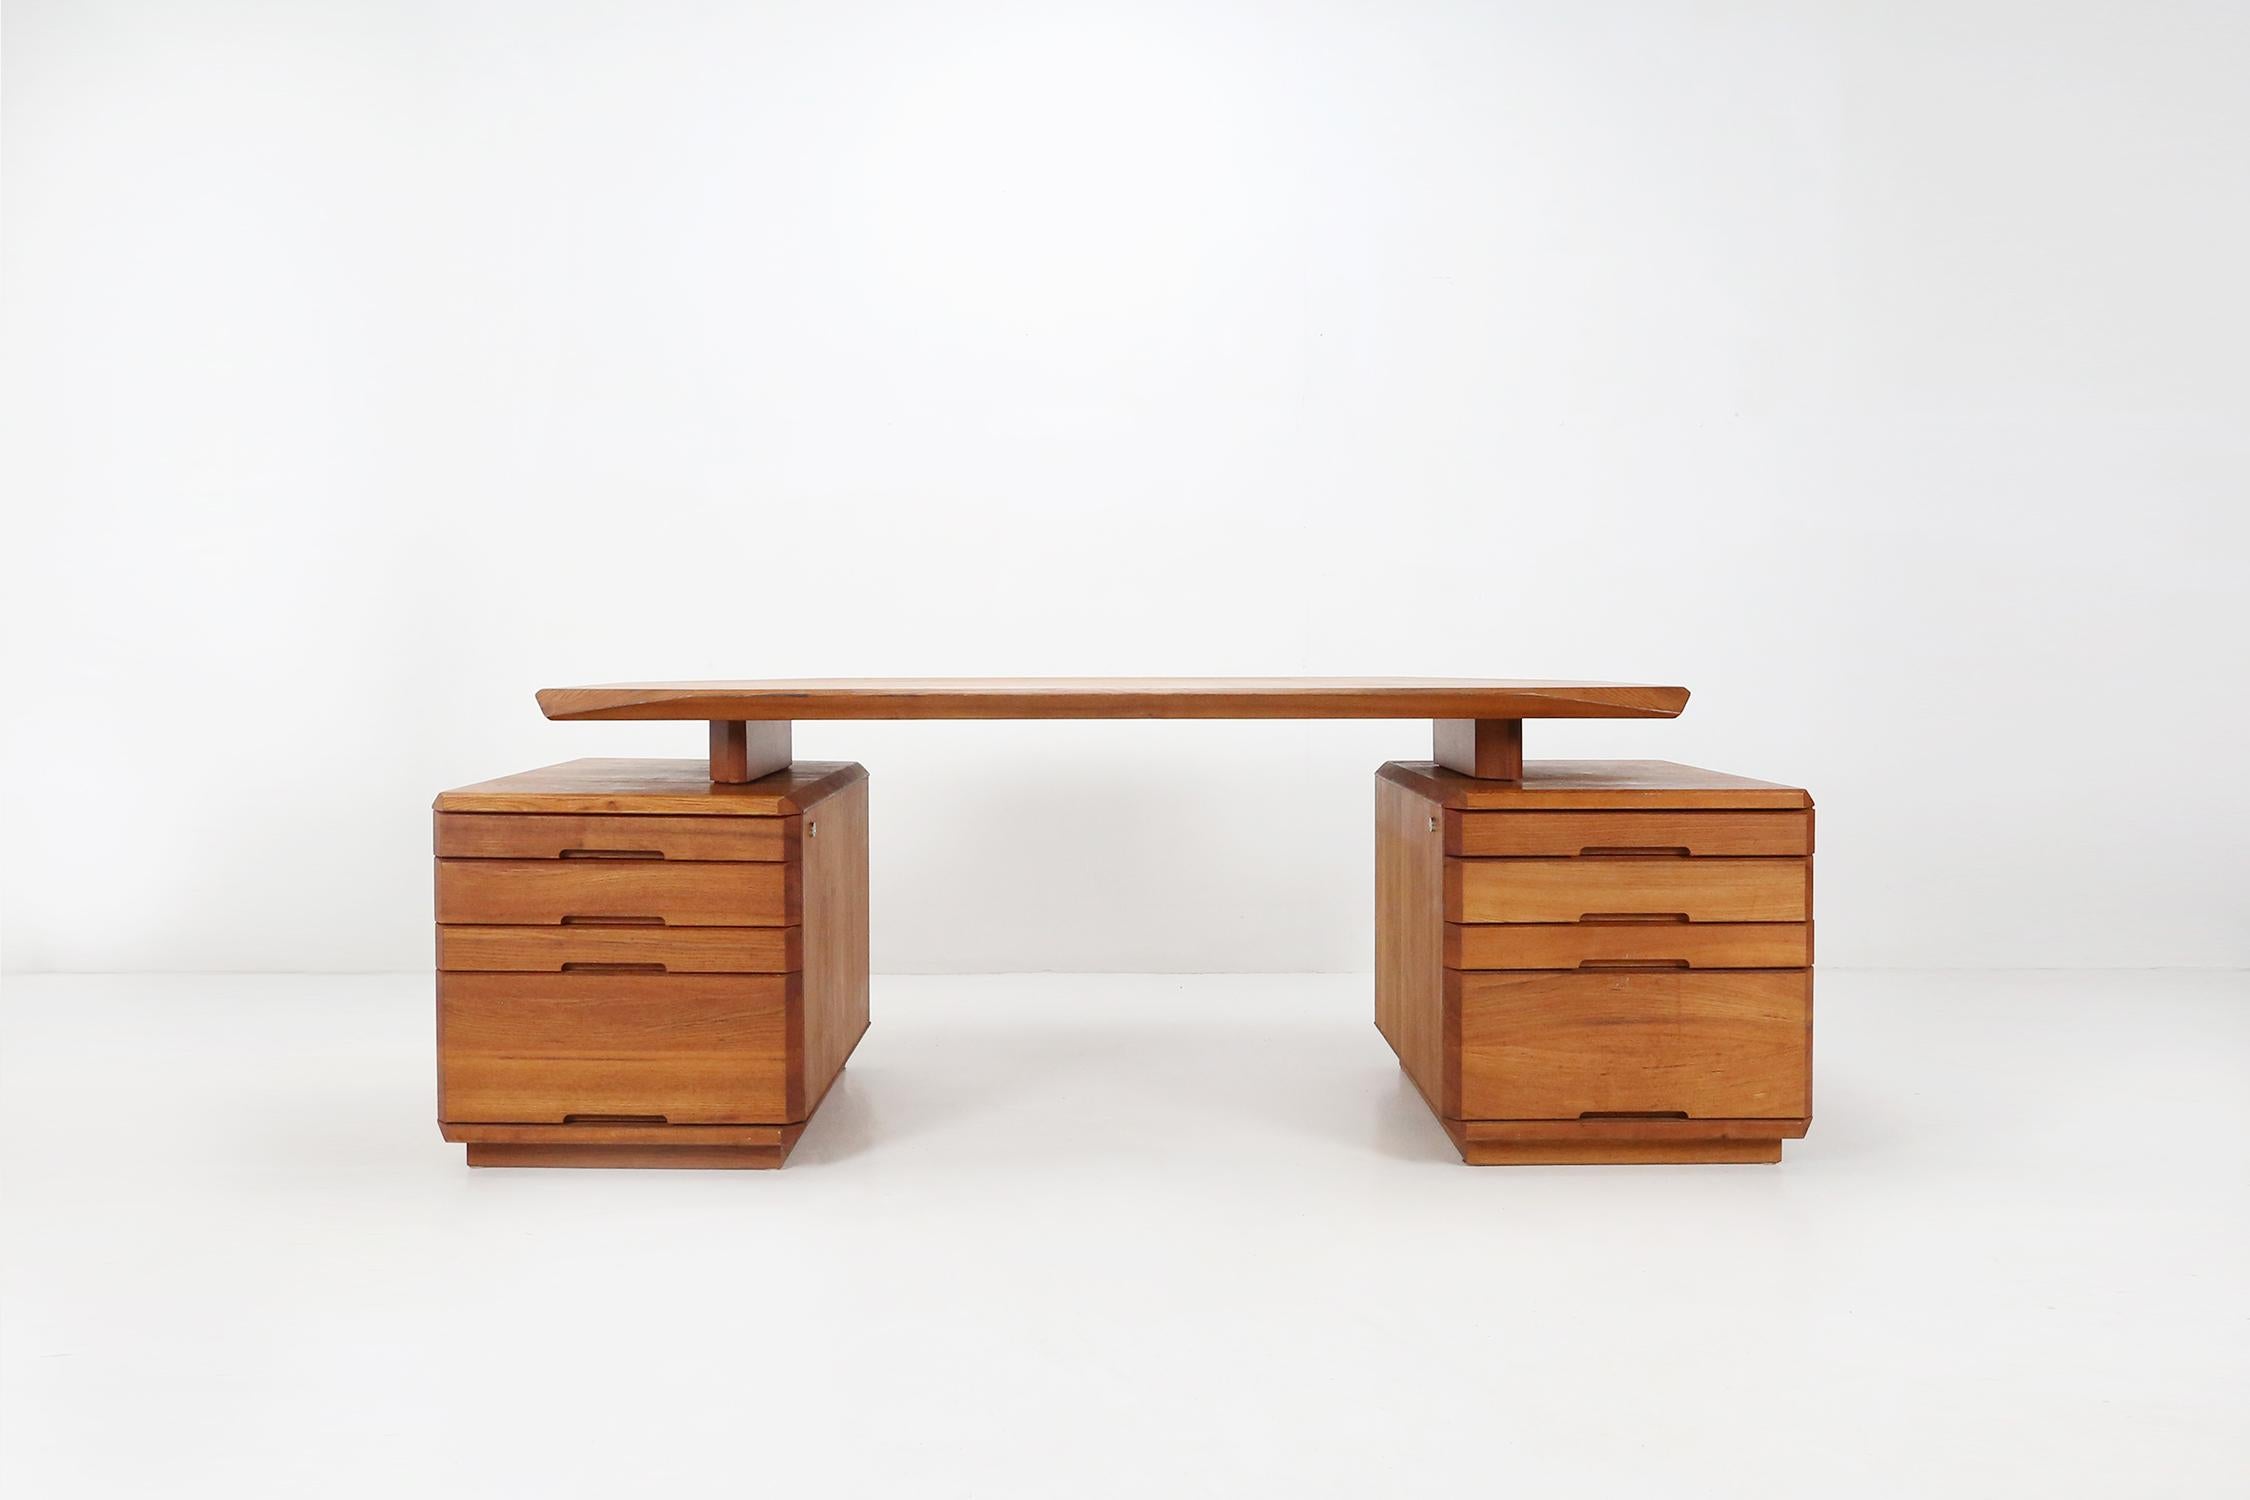 Desk B40 by French designer Pierre Chapo.
Designed in the 1980 with wonderfully edged floating desk top and two drawer cabinets in solid elm wood.
This rarely seen desk is in great condition with a nice all-over patina.

This desk can be placed